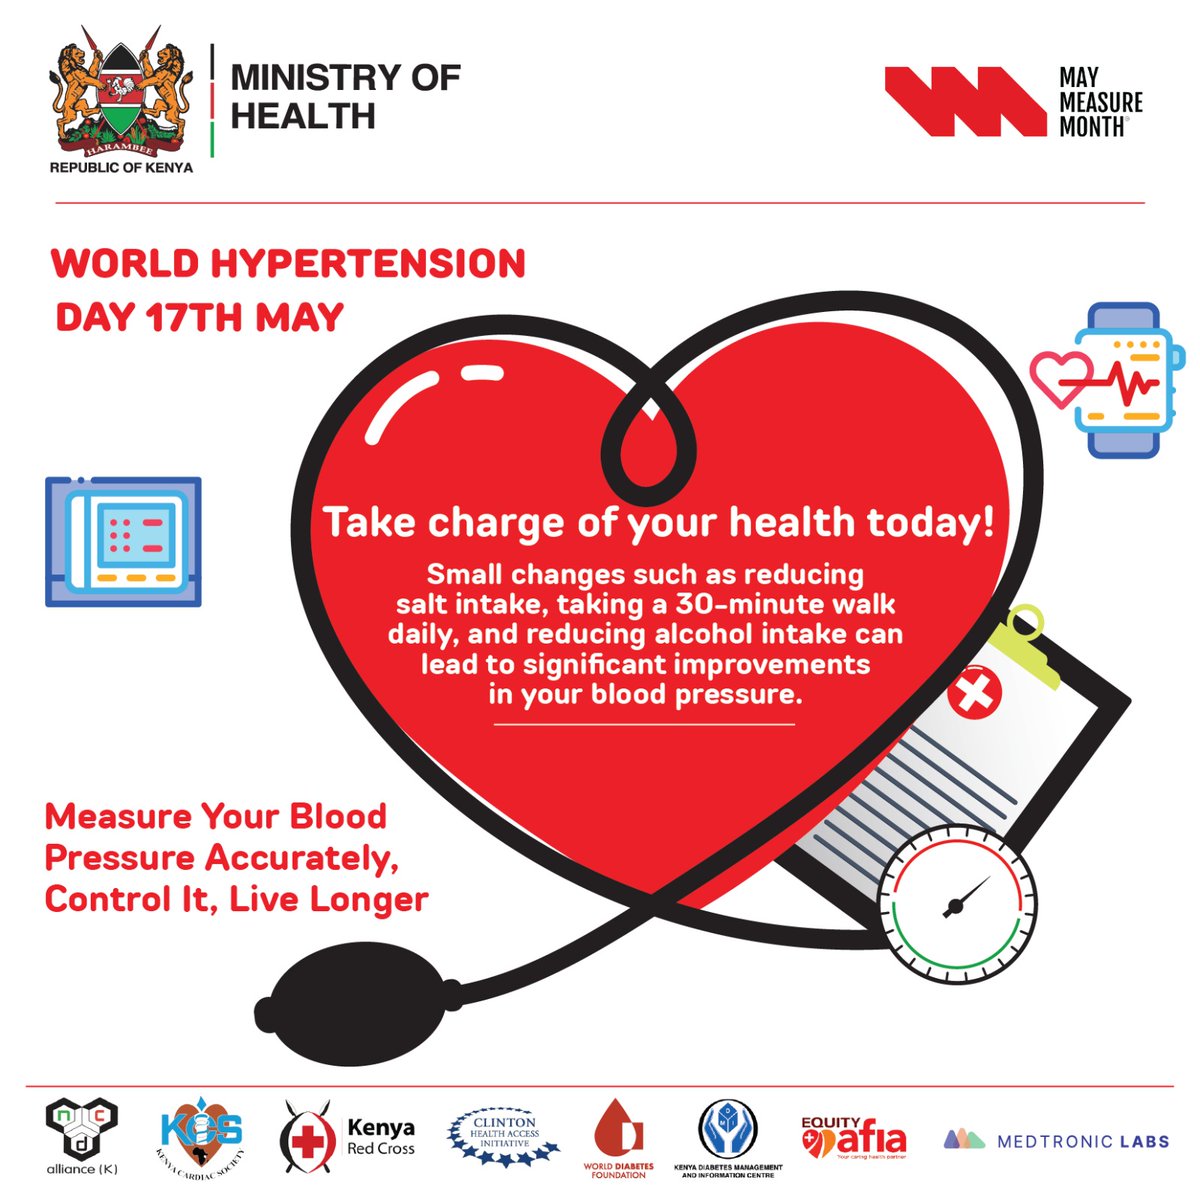 Today is #WorldHypertensionDay 🤔Hypertension, or high blood pressure, means the blood is flowing through arteries at a higher-than-normal pressure, potentially damaging blood vessels and affecting organs like the heart, brain, and kidneys. #KnowYourNumbers #TuongeeNCDs